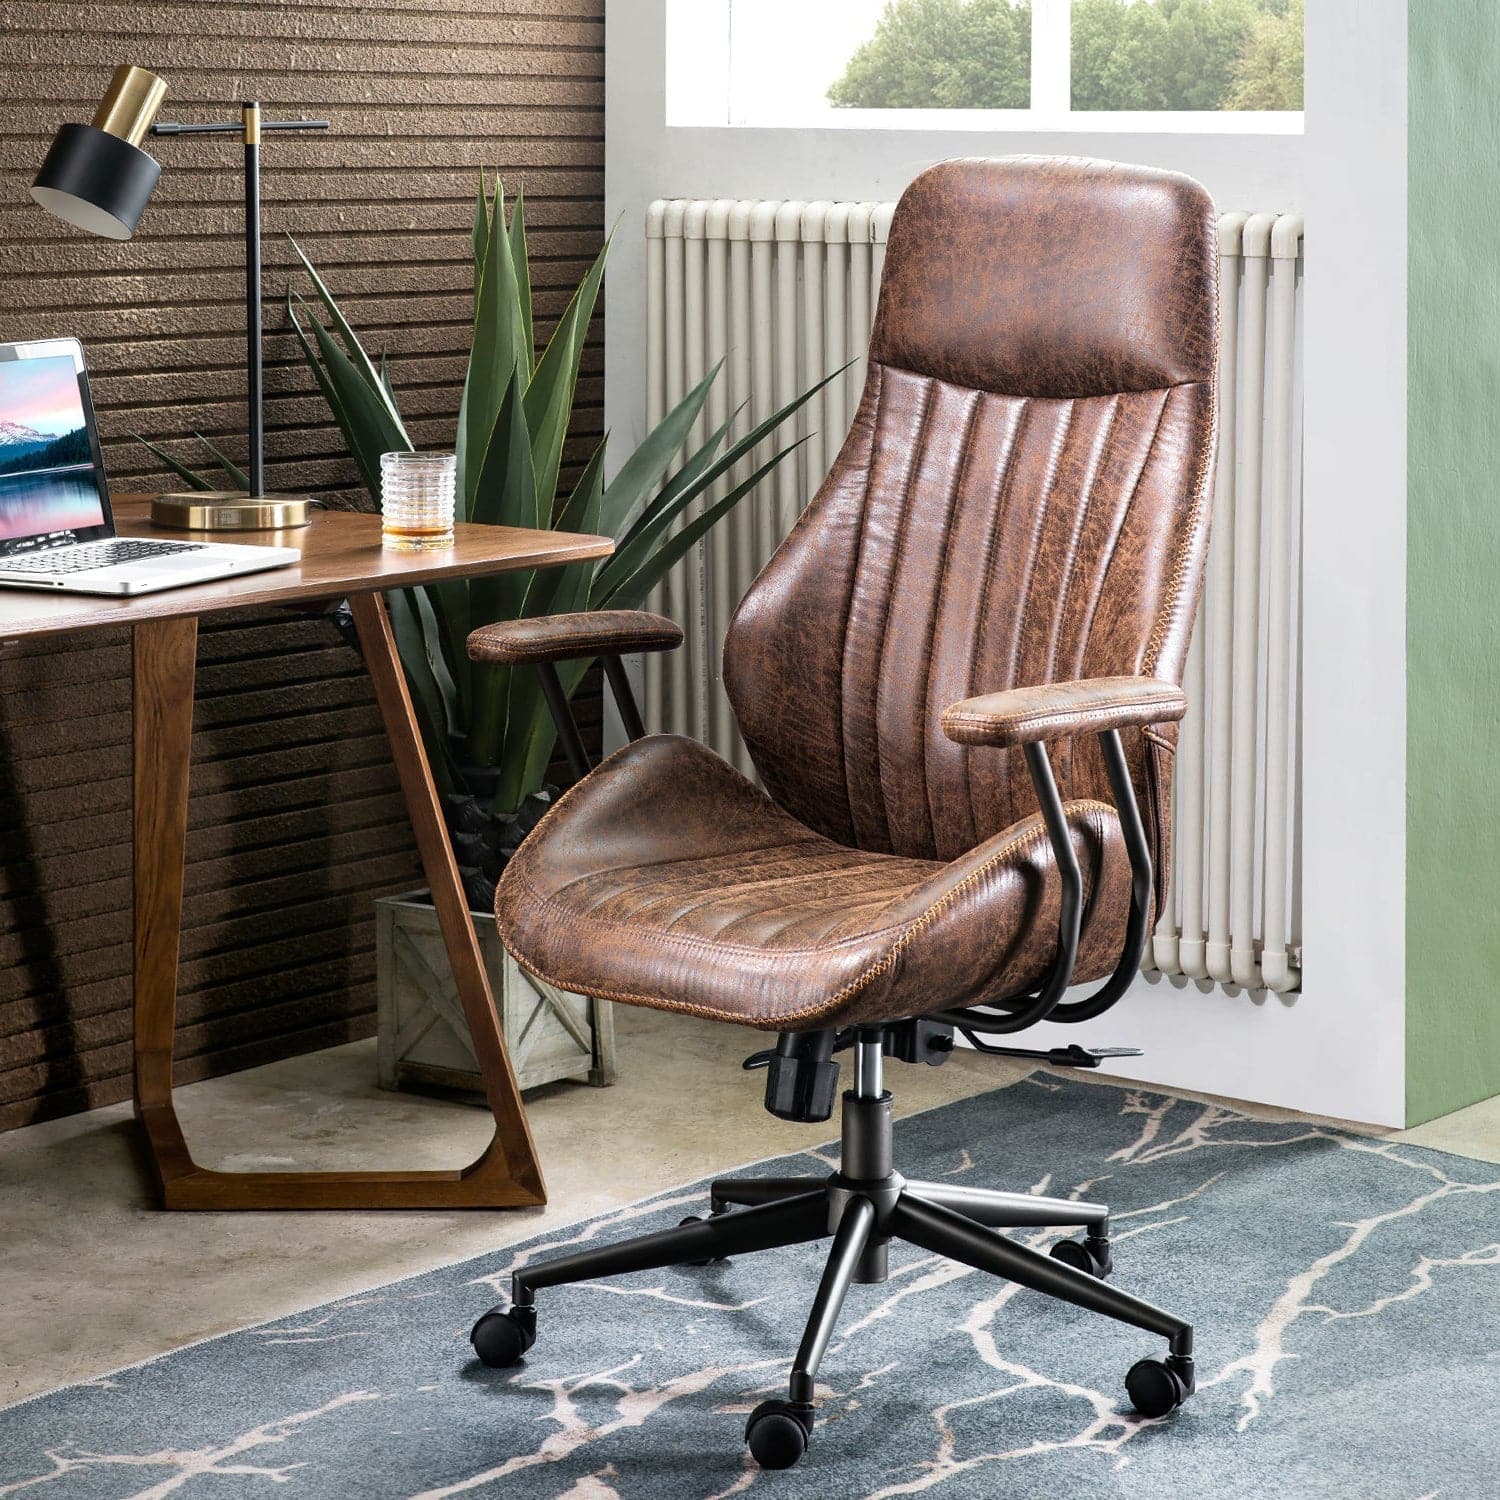 How to Maximize an Office with a Limited Space: Choose Adjustable and Mobile Office Chair